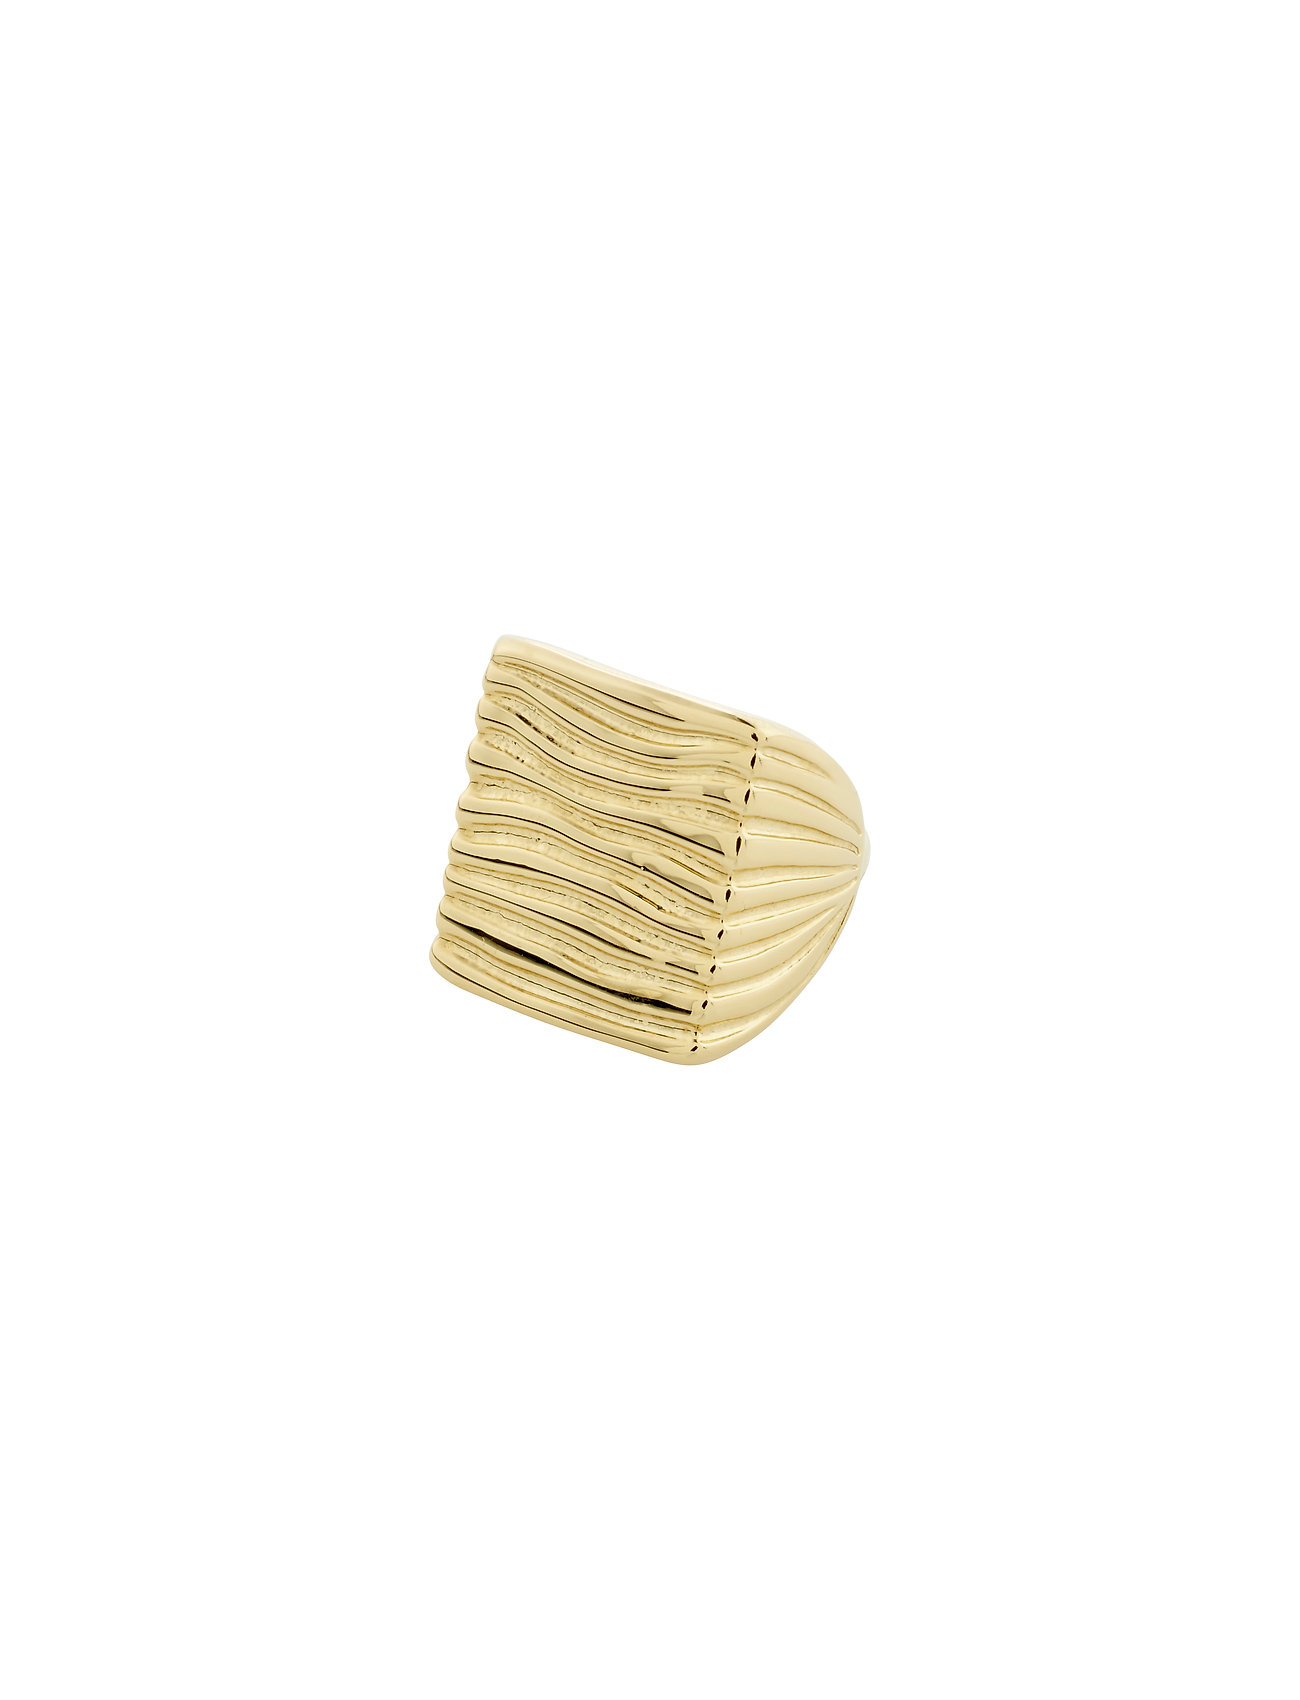 Hopeful Wavy Signet Ring Gold-Plated Accessories Kids Jewellery Rings Gold Pilgrim